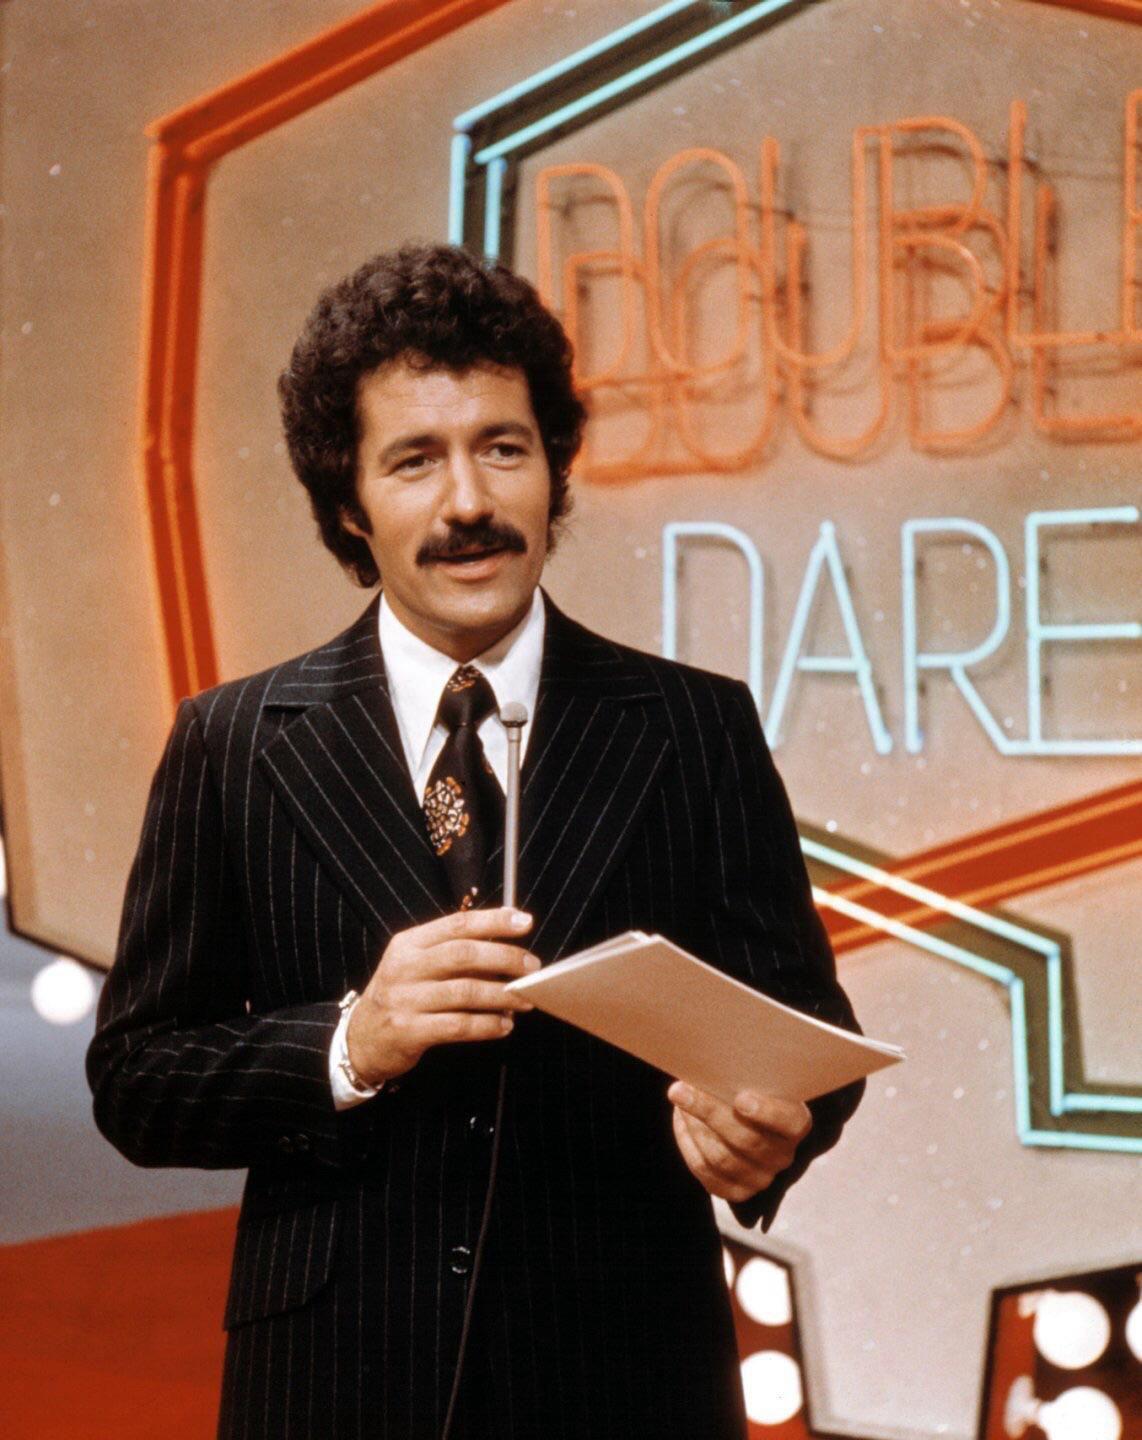 Alex+Trebek+in+all+his+glory+roundabout+1977.